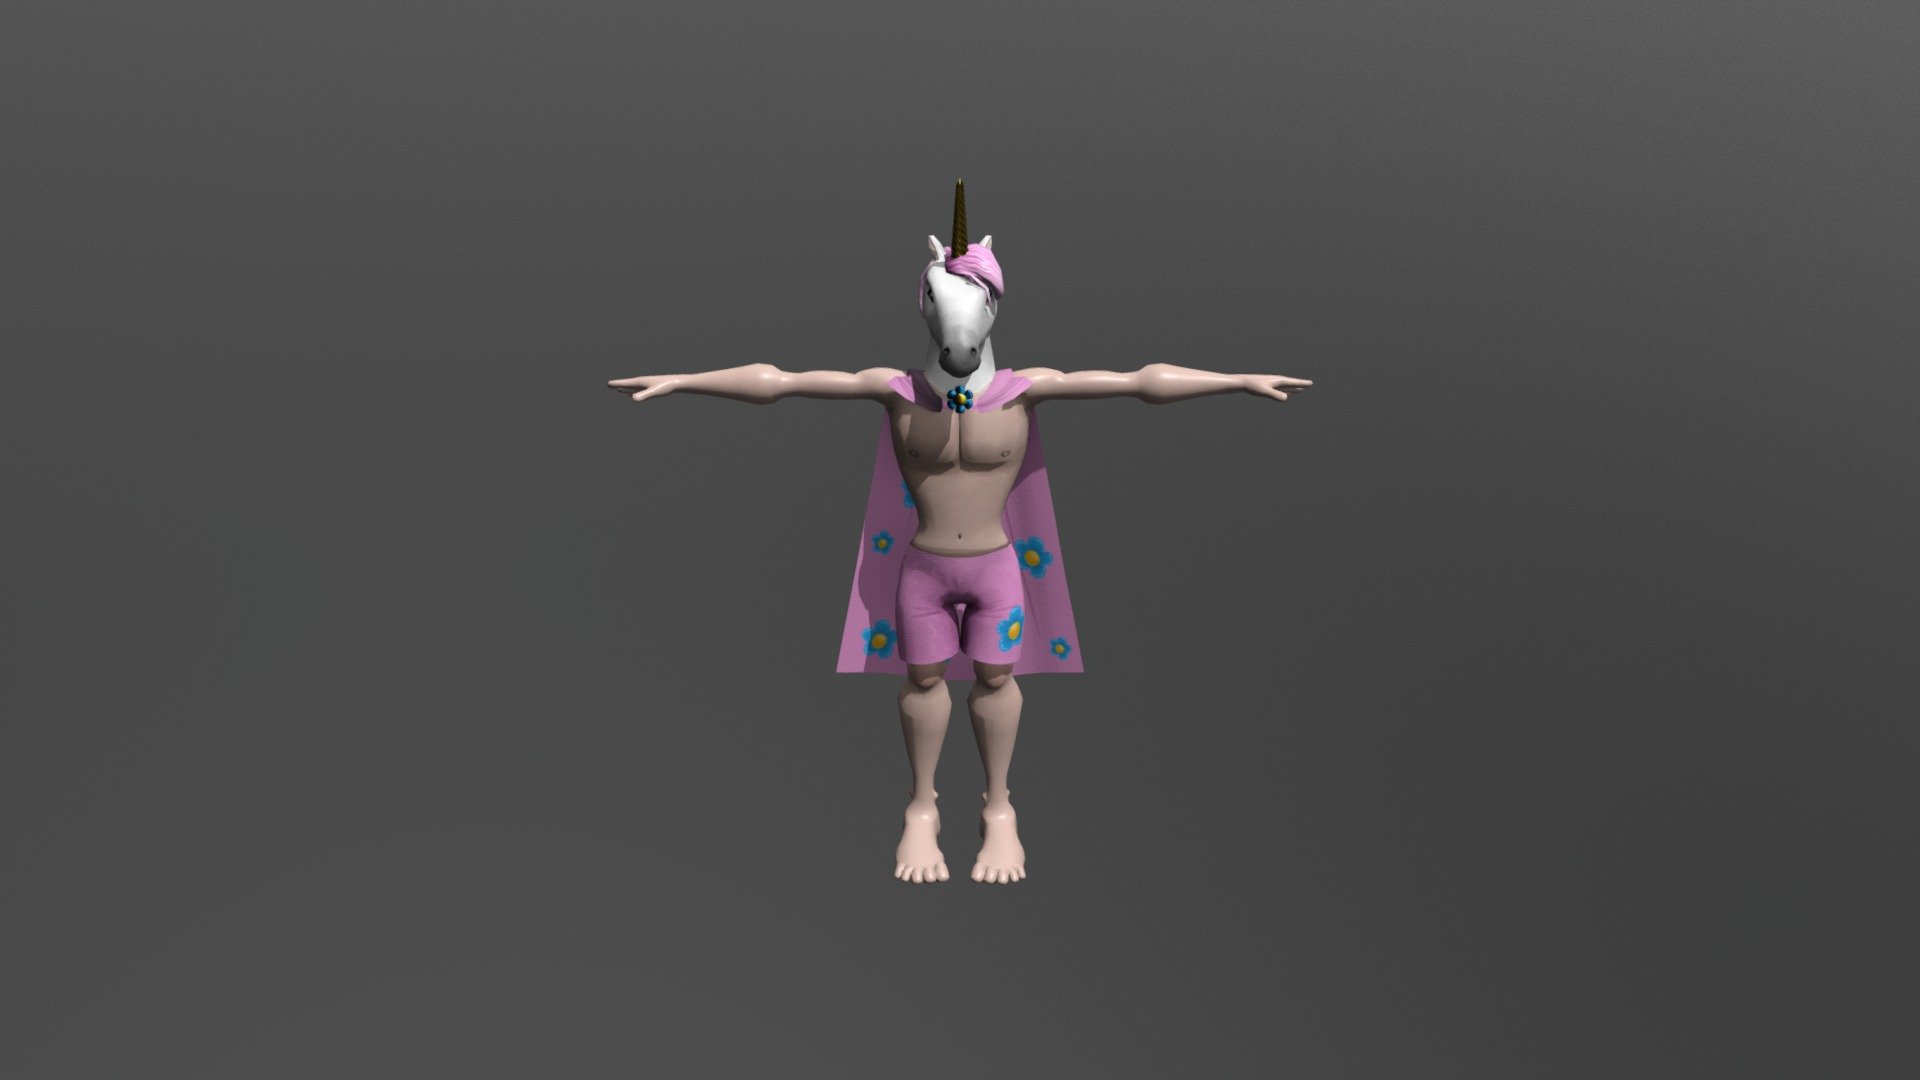 Main character made for a GameJam videogame 3d model